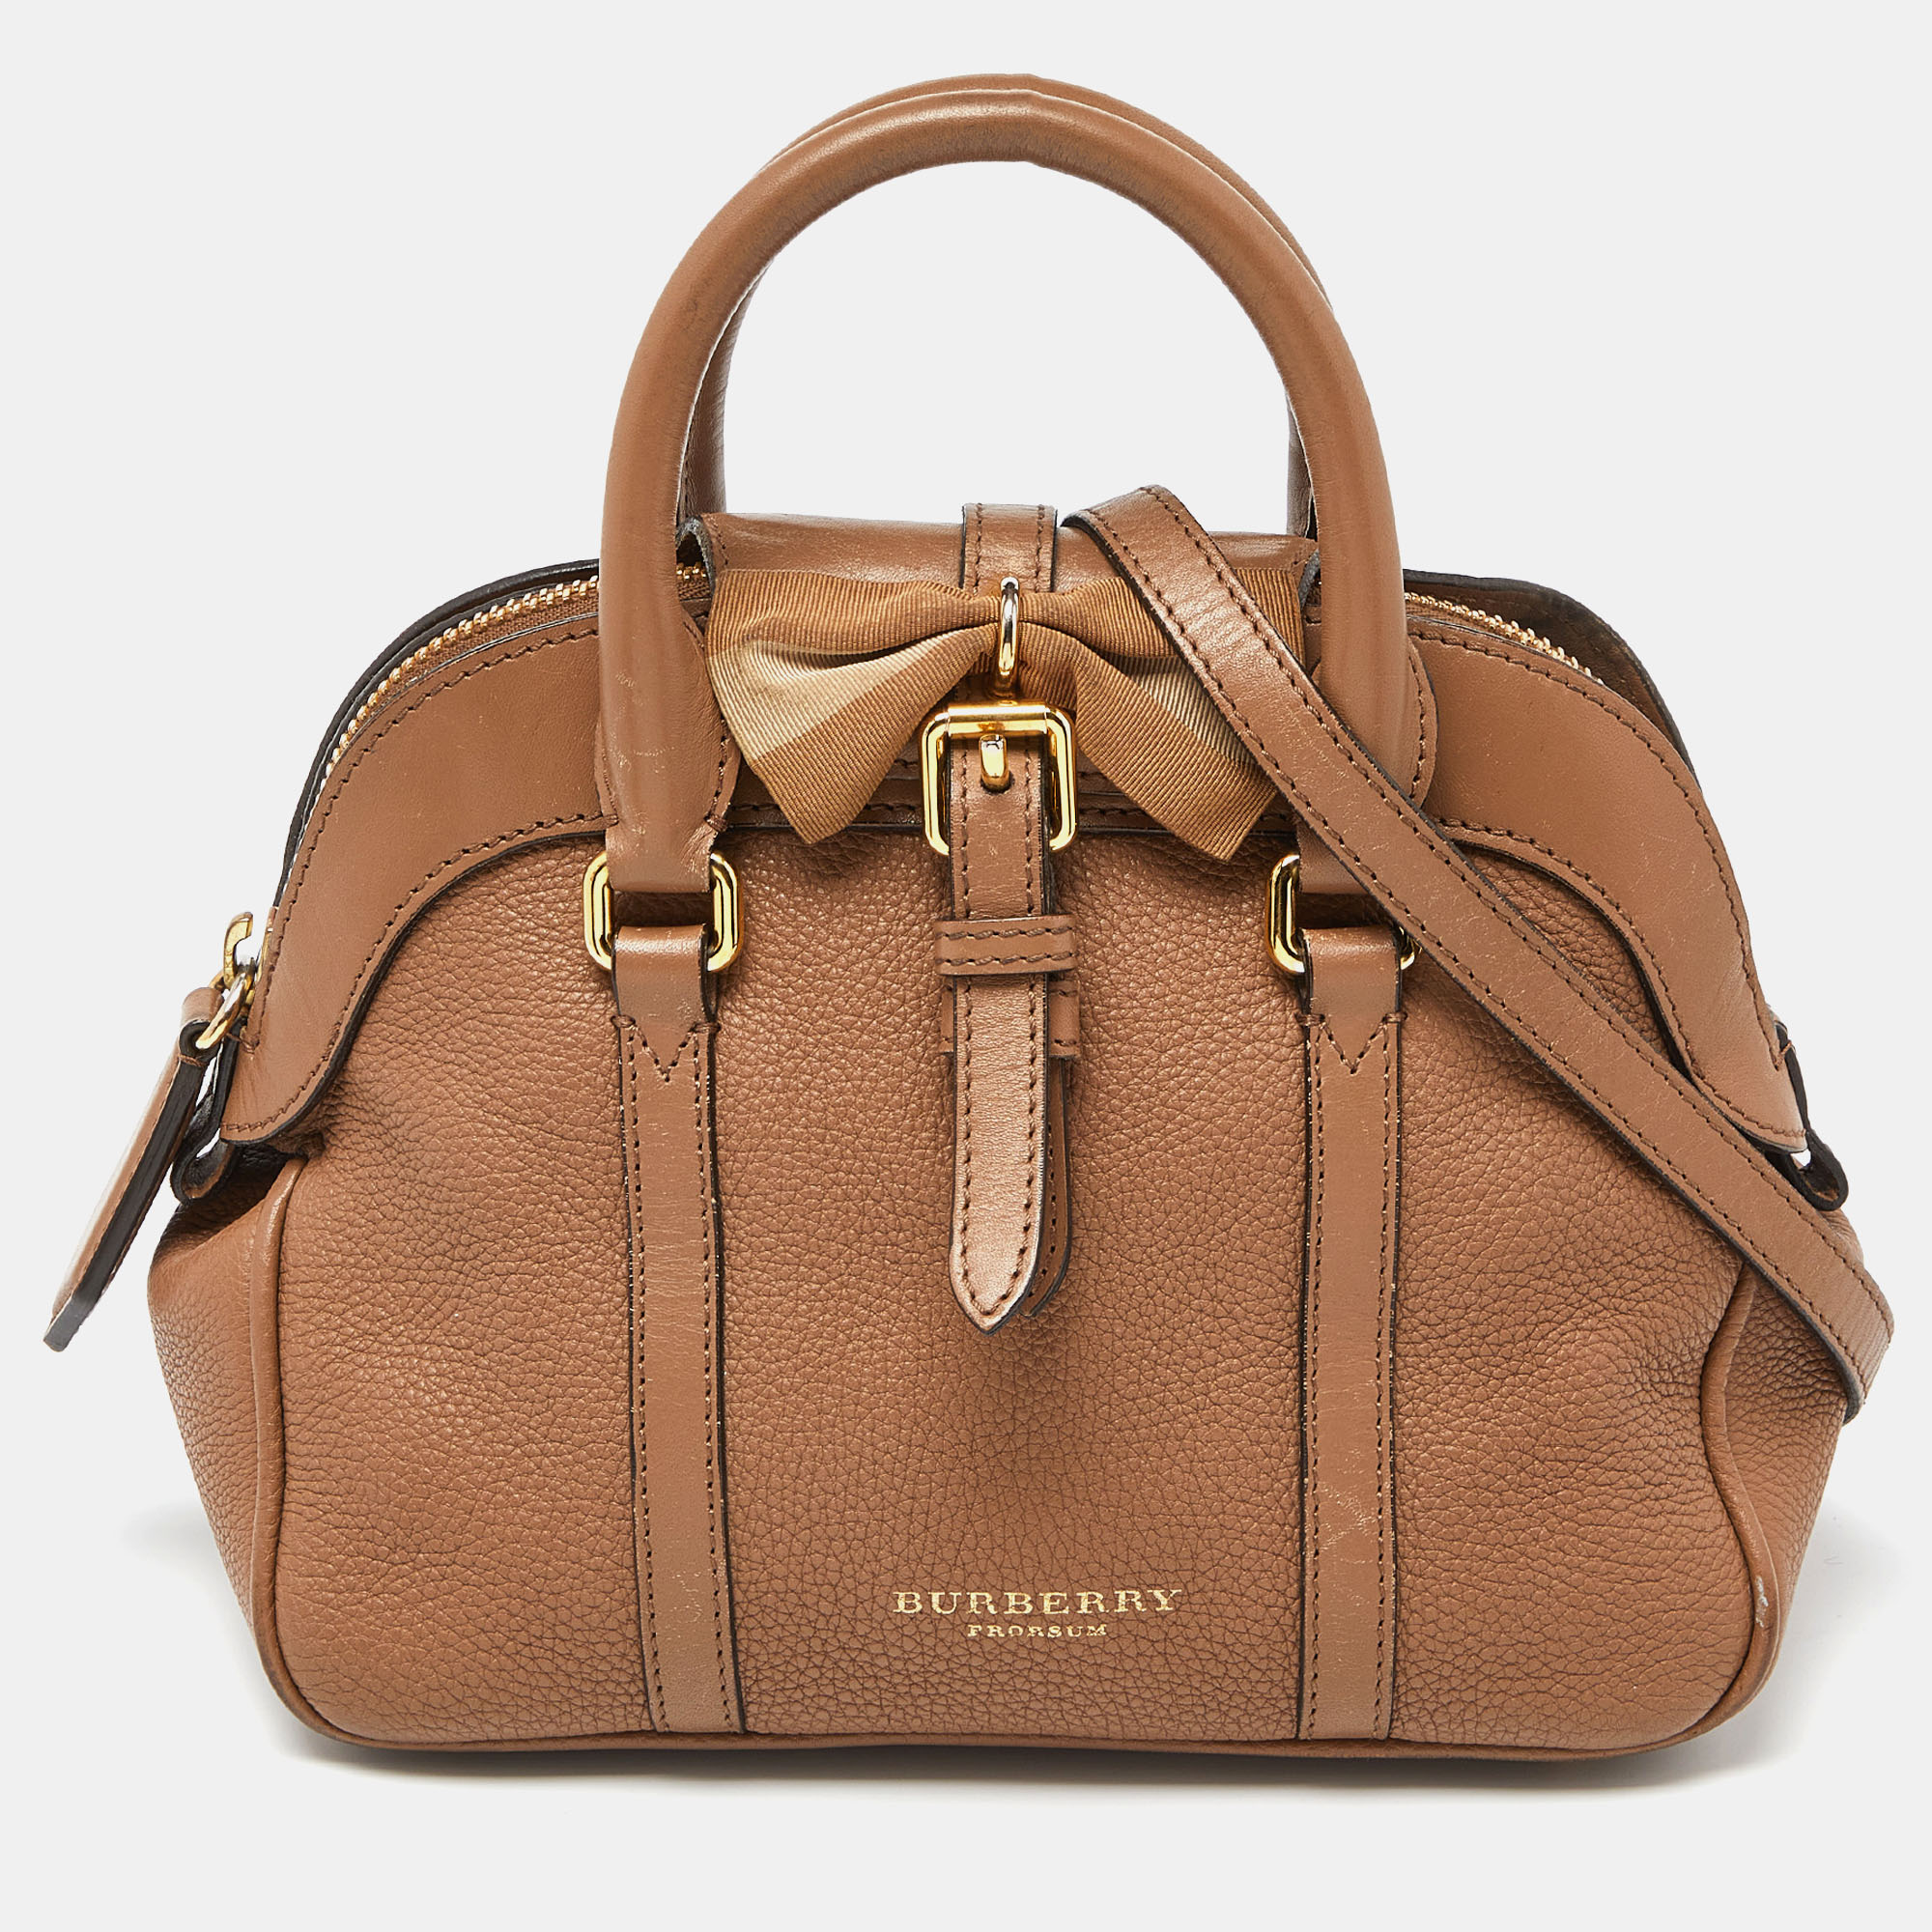 Burberry brown leather small bow flap satchel